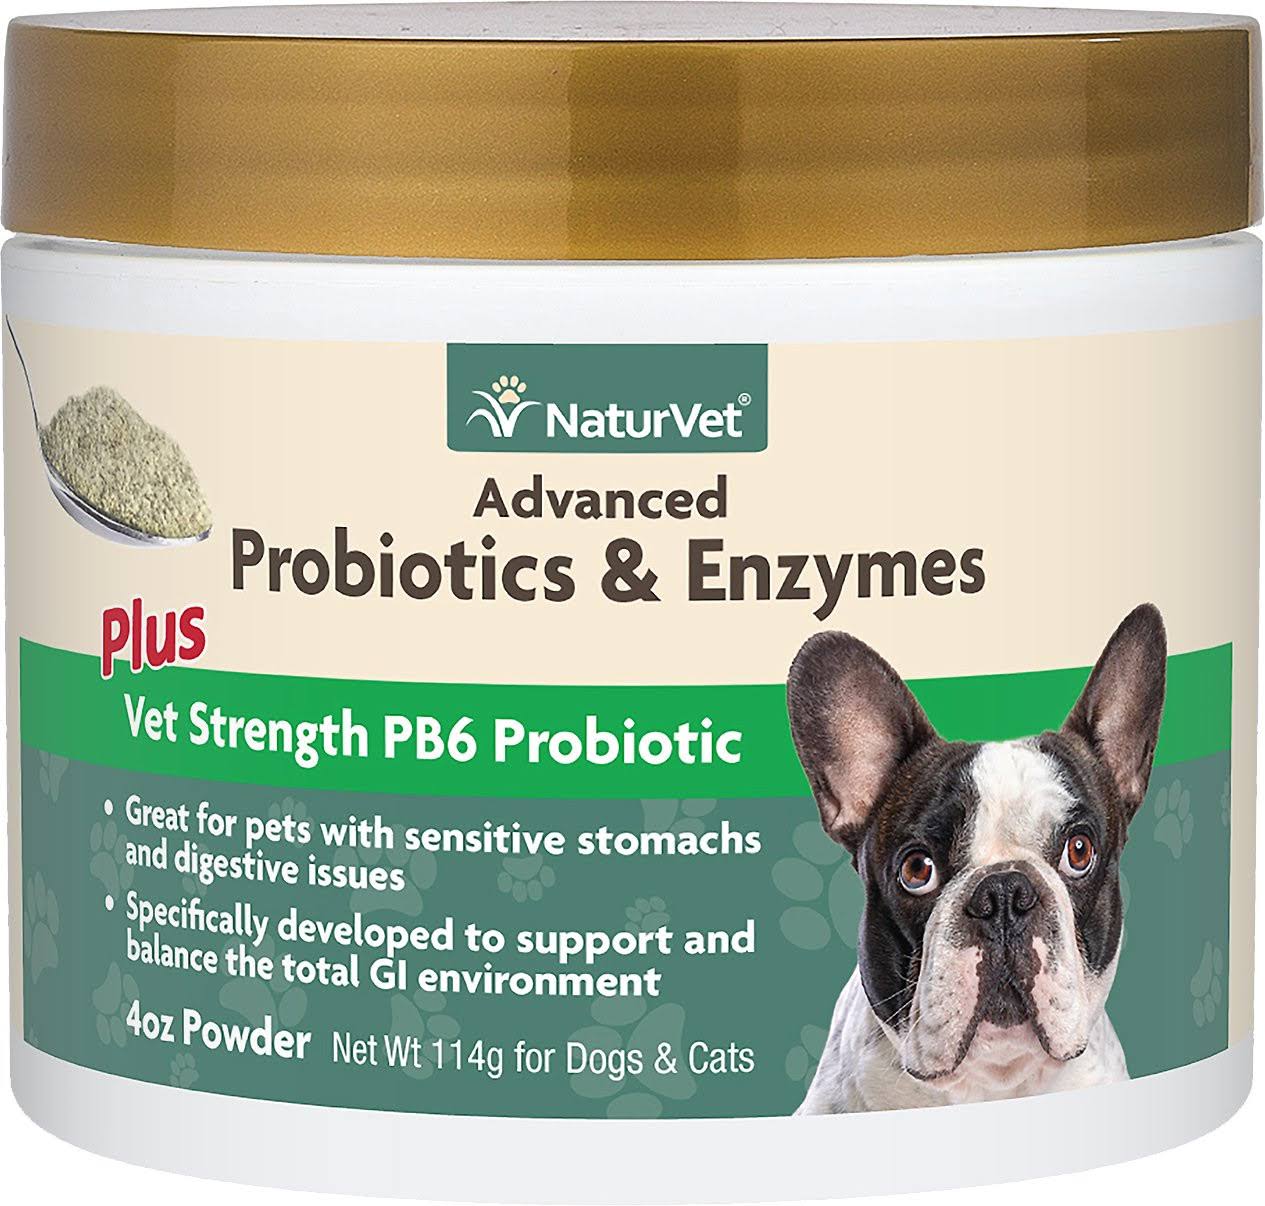 Naturvet Advanced Probiotic and Enzymes Powder - For Dogs, 4oz